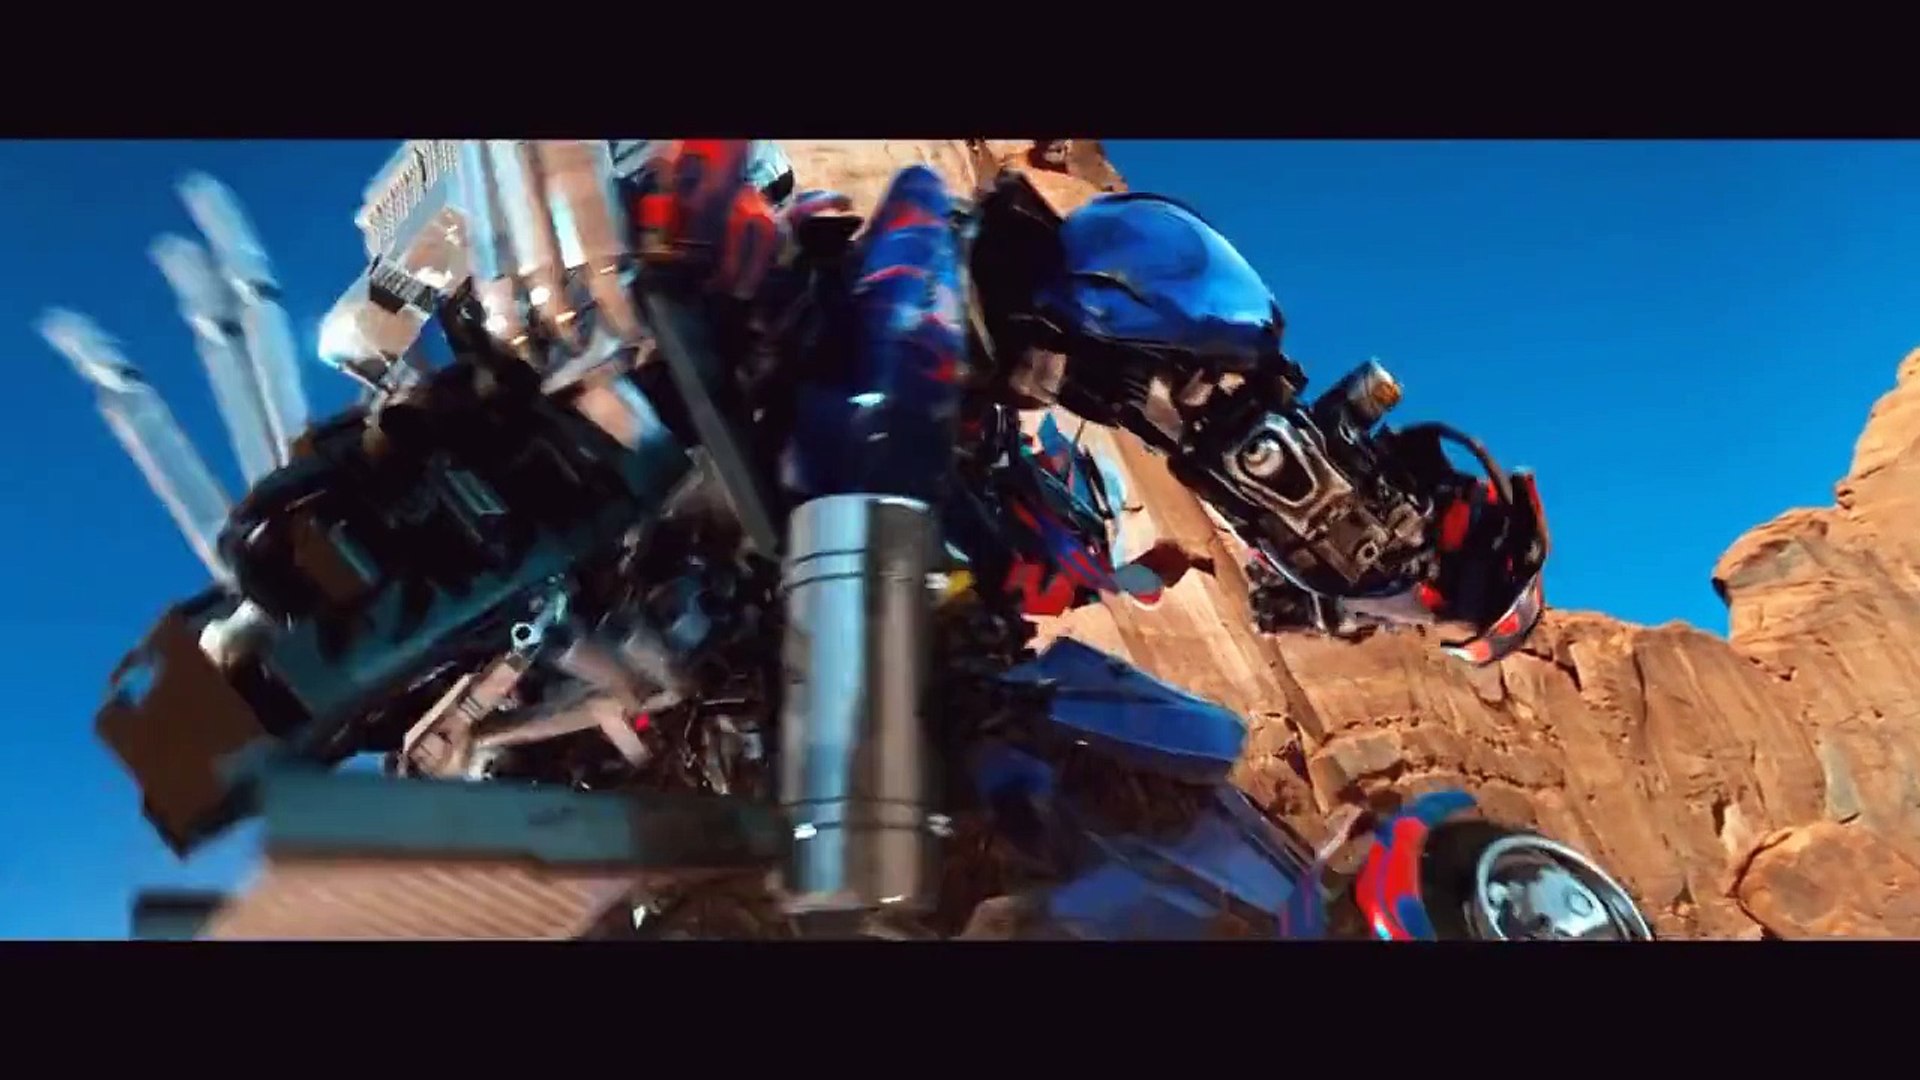 transformers age of extinction full movie dailymotion